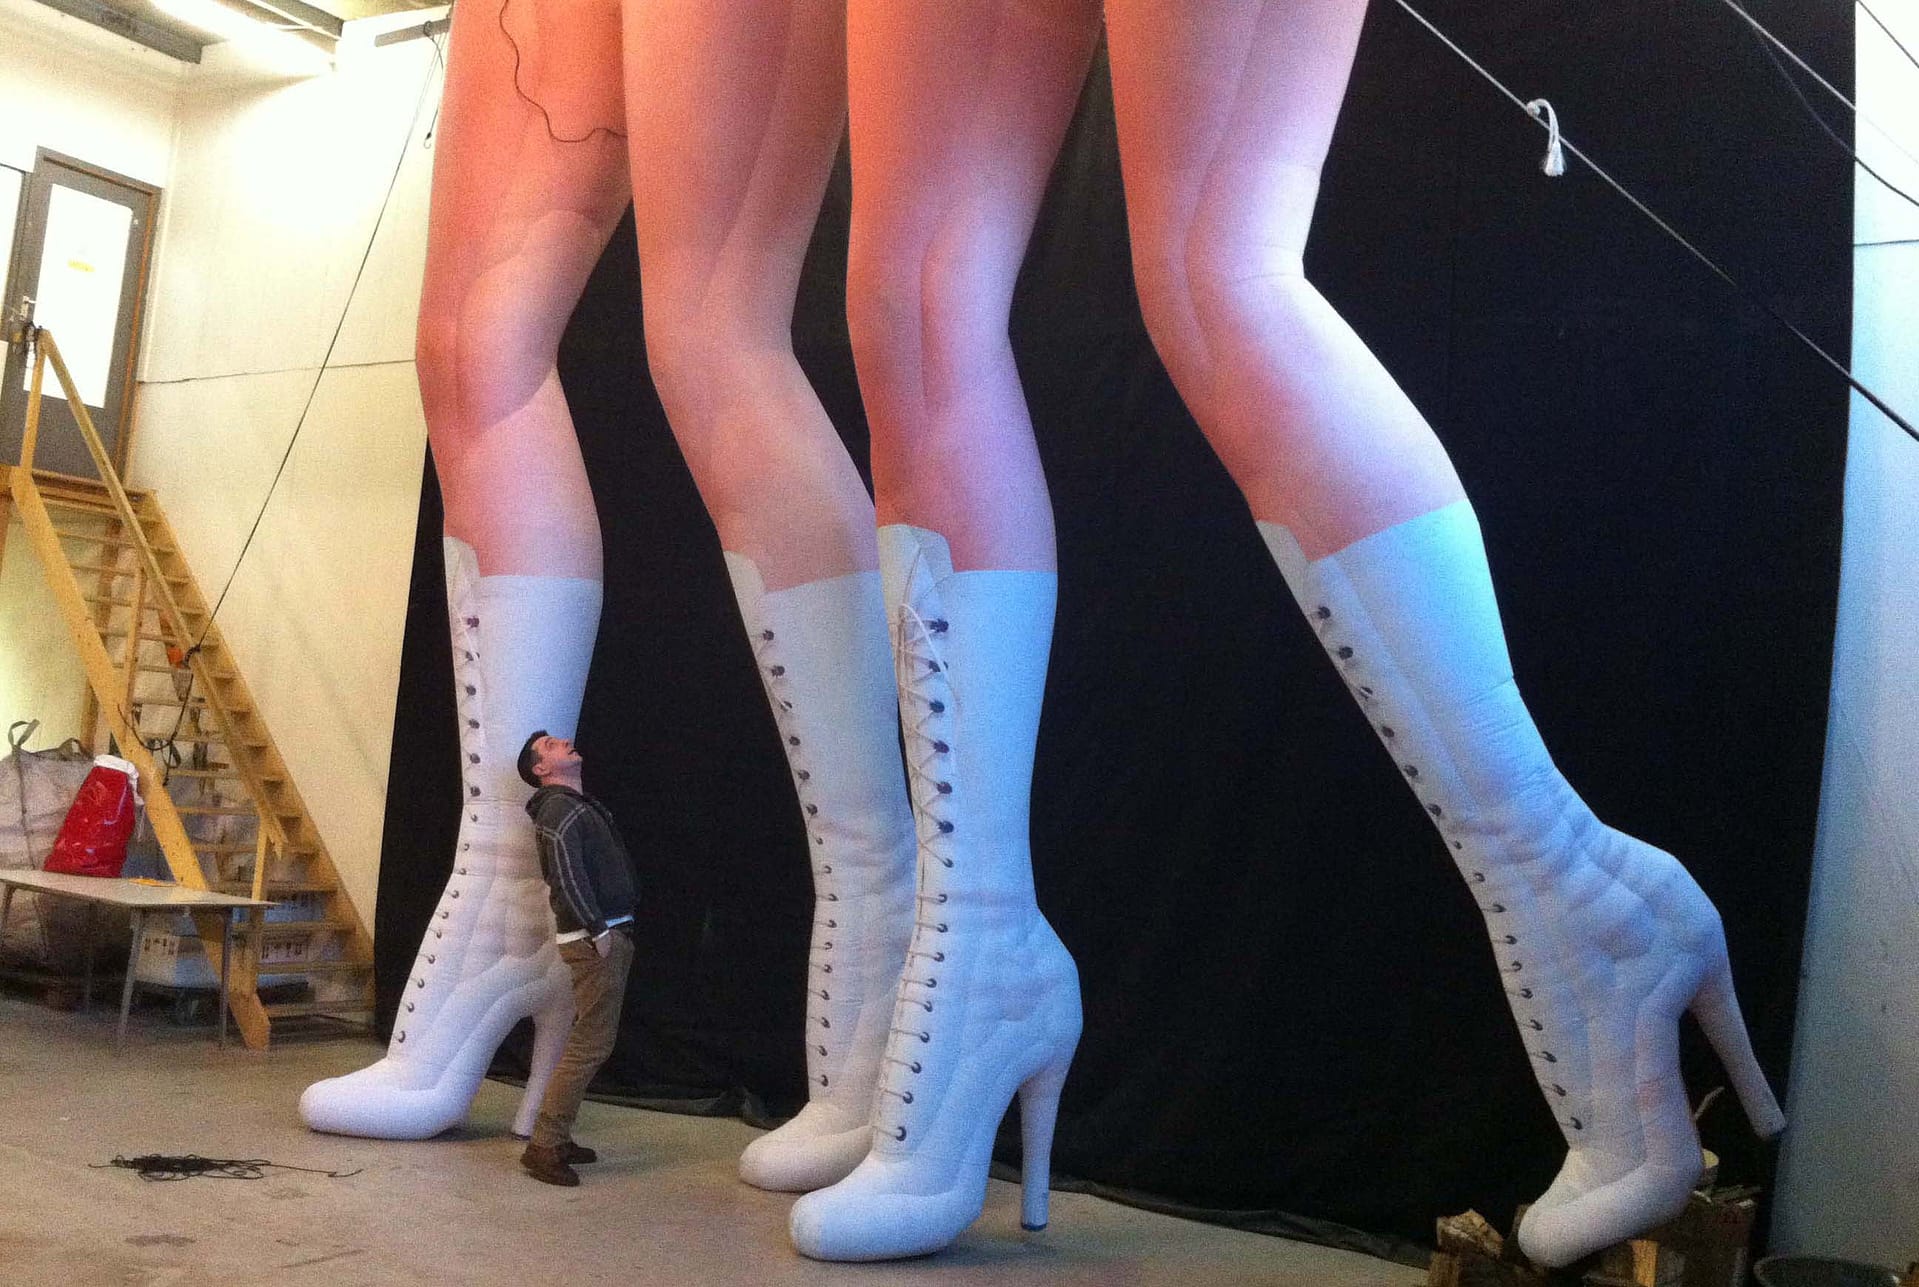 5m inflatable legs in knee-high boots Airworks Rentals